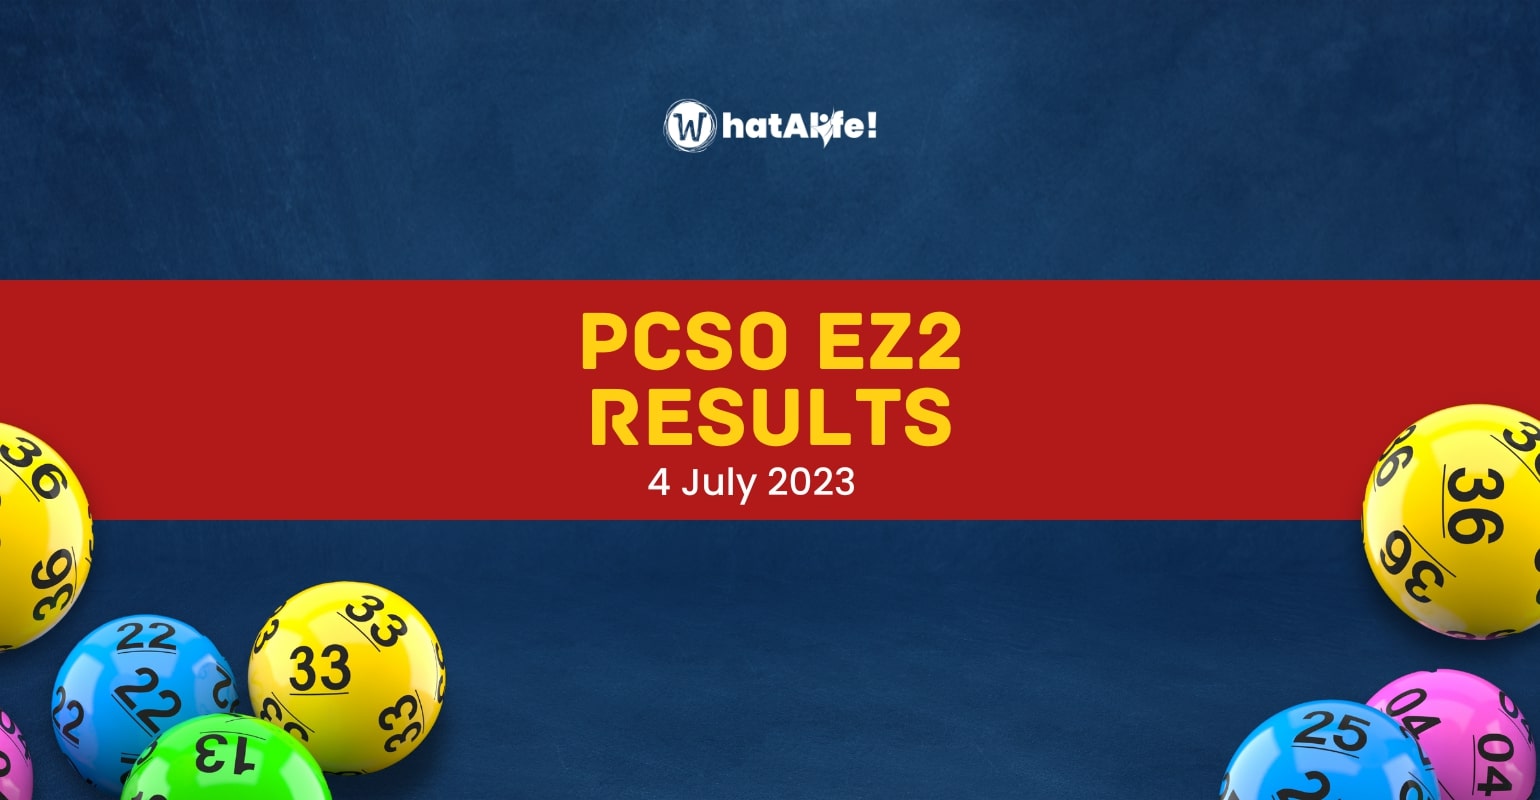 EZ2 2D RESULTS July 4, 2023 (Tuesday)